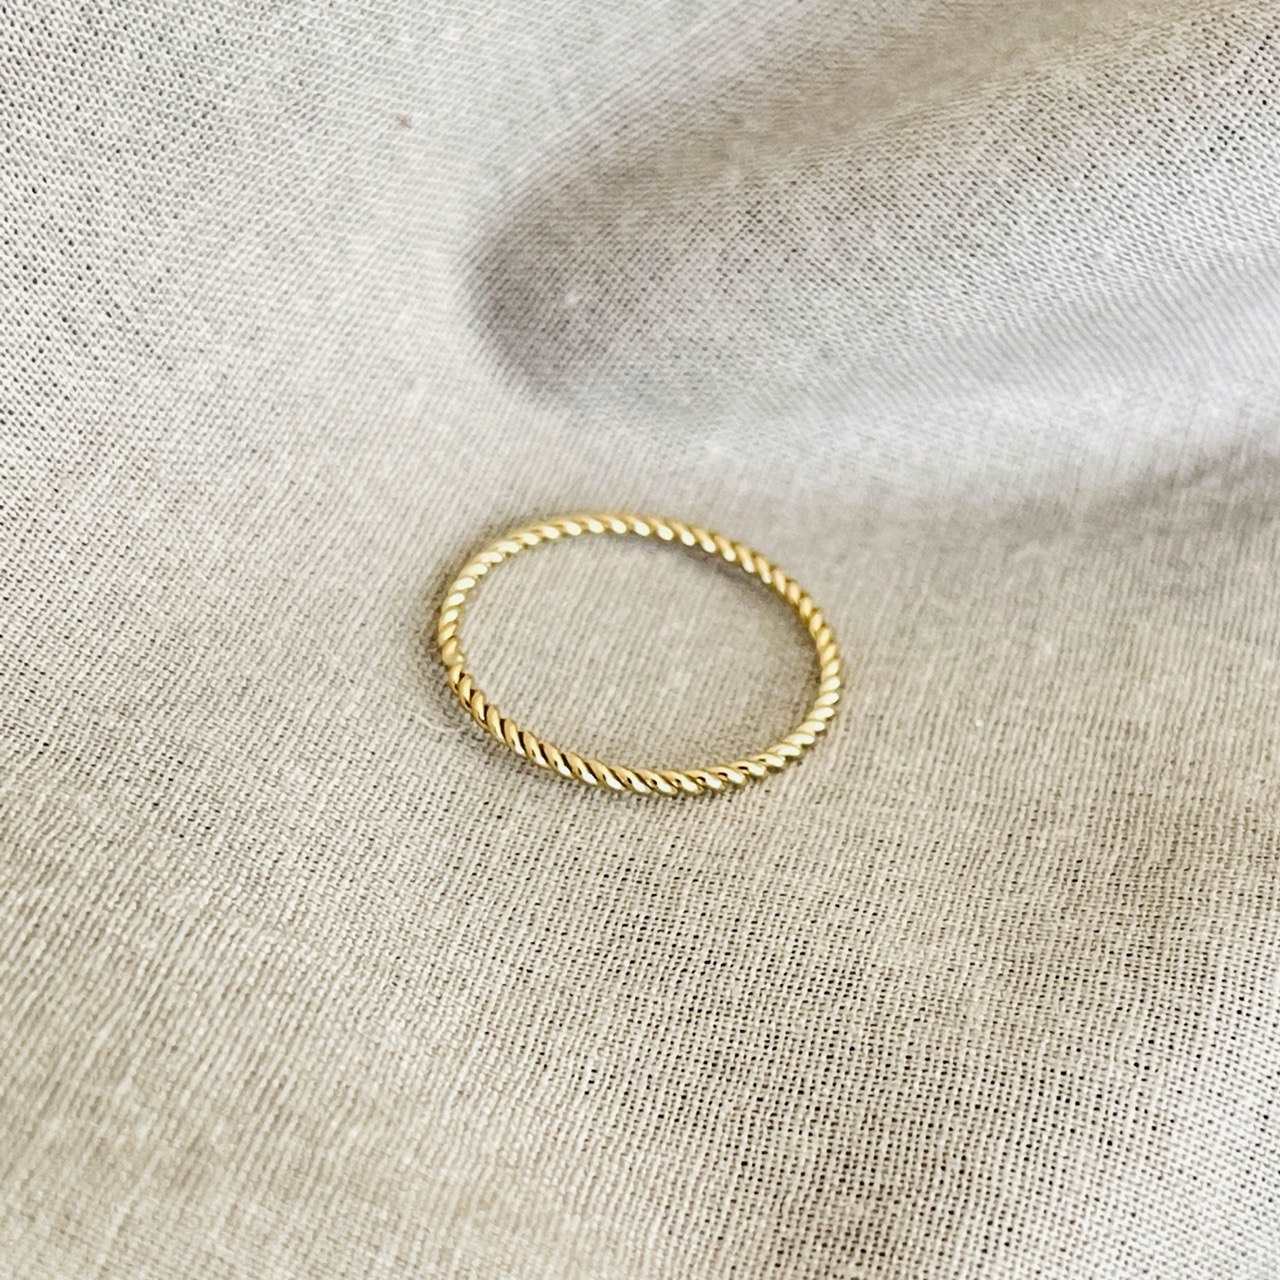 14K Gold Filled Tarnish Resistance Twisted Ring, Dainty Twist Rope Stacking Ring In Gold - sjewellery|sara jewellery shop toronto